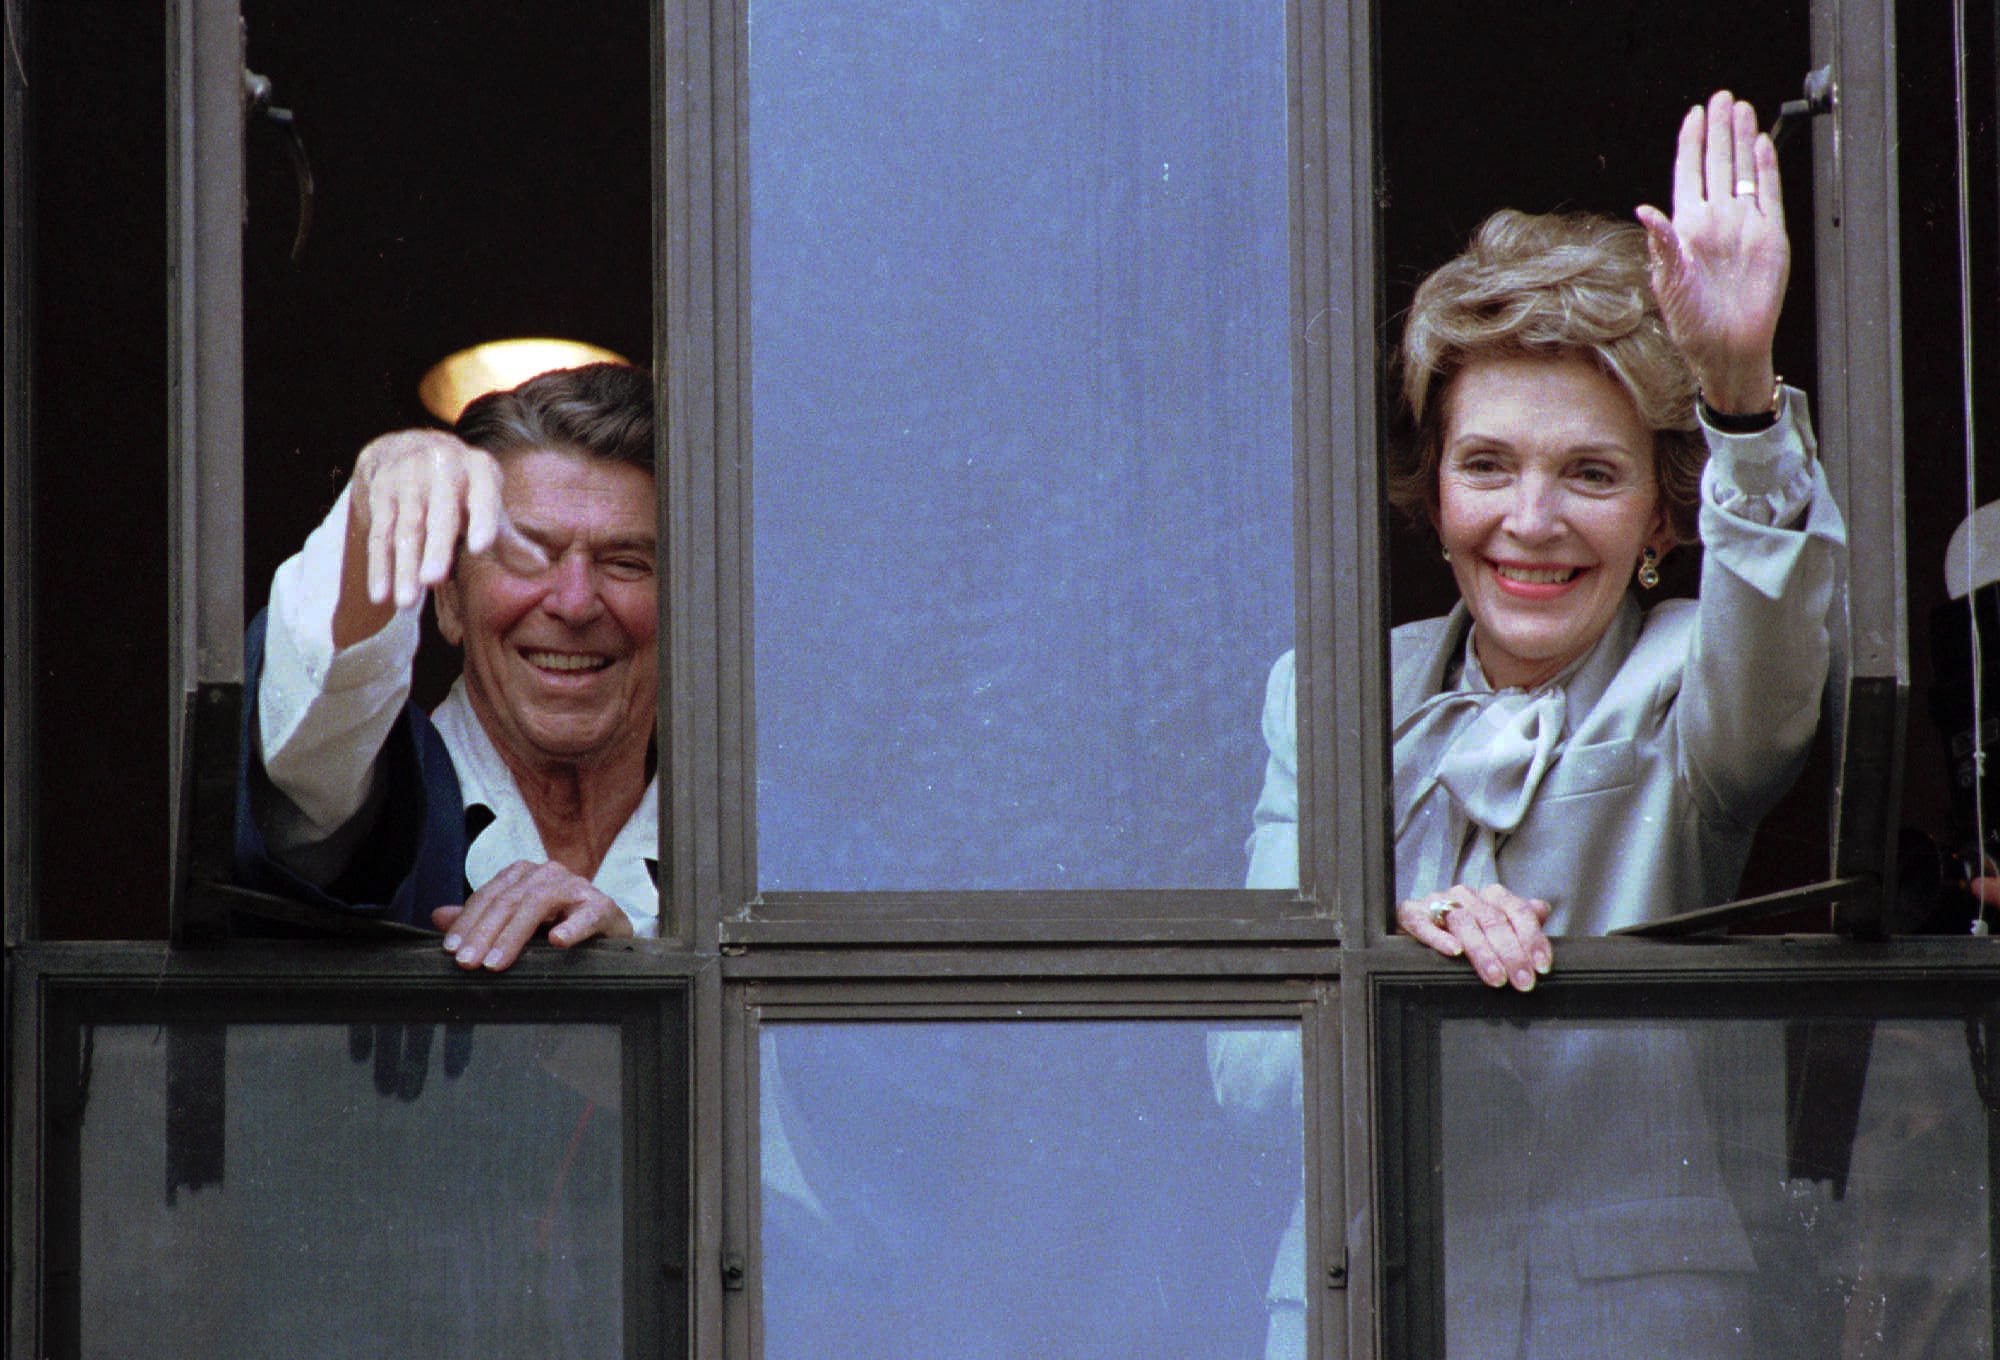 FILE - In this July 18, 1985, file photo, President Ronald Reagan and his wife, Nancy, wave from windows of his hospital room at the Navy Medical Center in Bethesda, Md., on July 18, 1985.